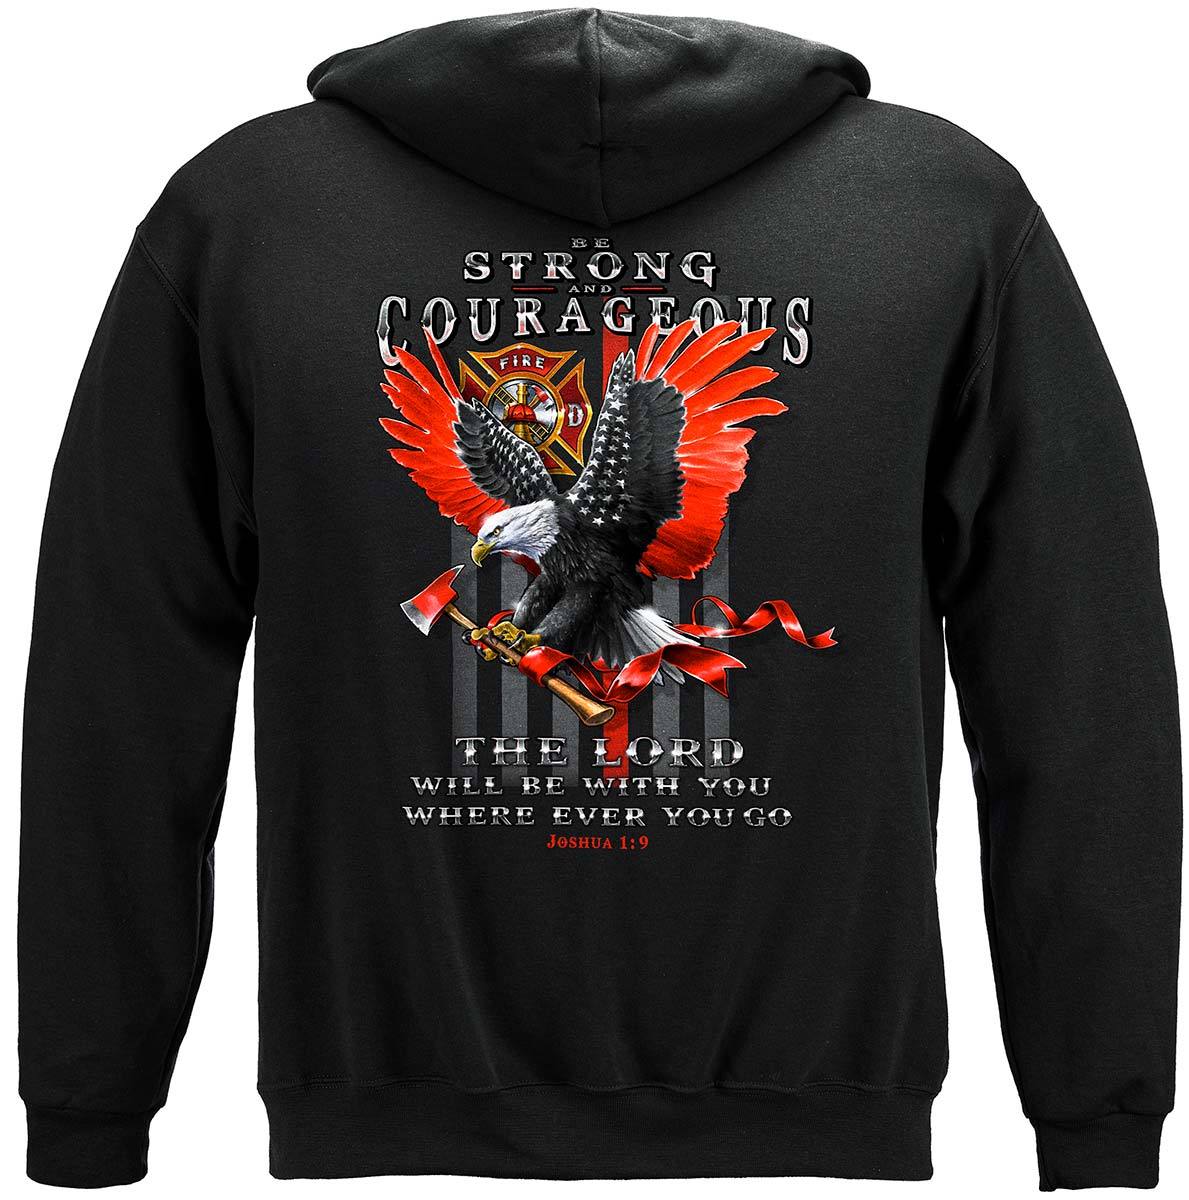 Firefighter Eagle Flag Red Line Premium Hooded Sweat Shirt